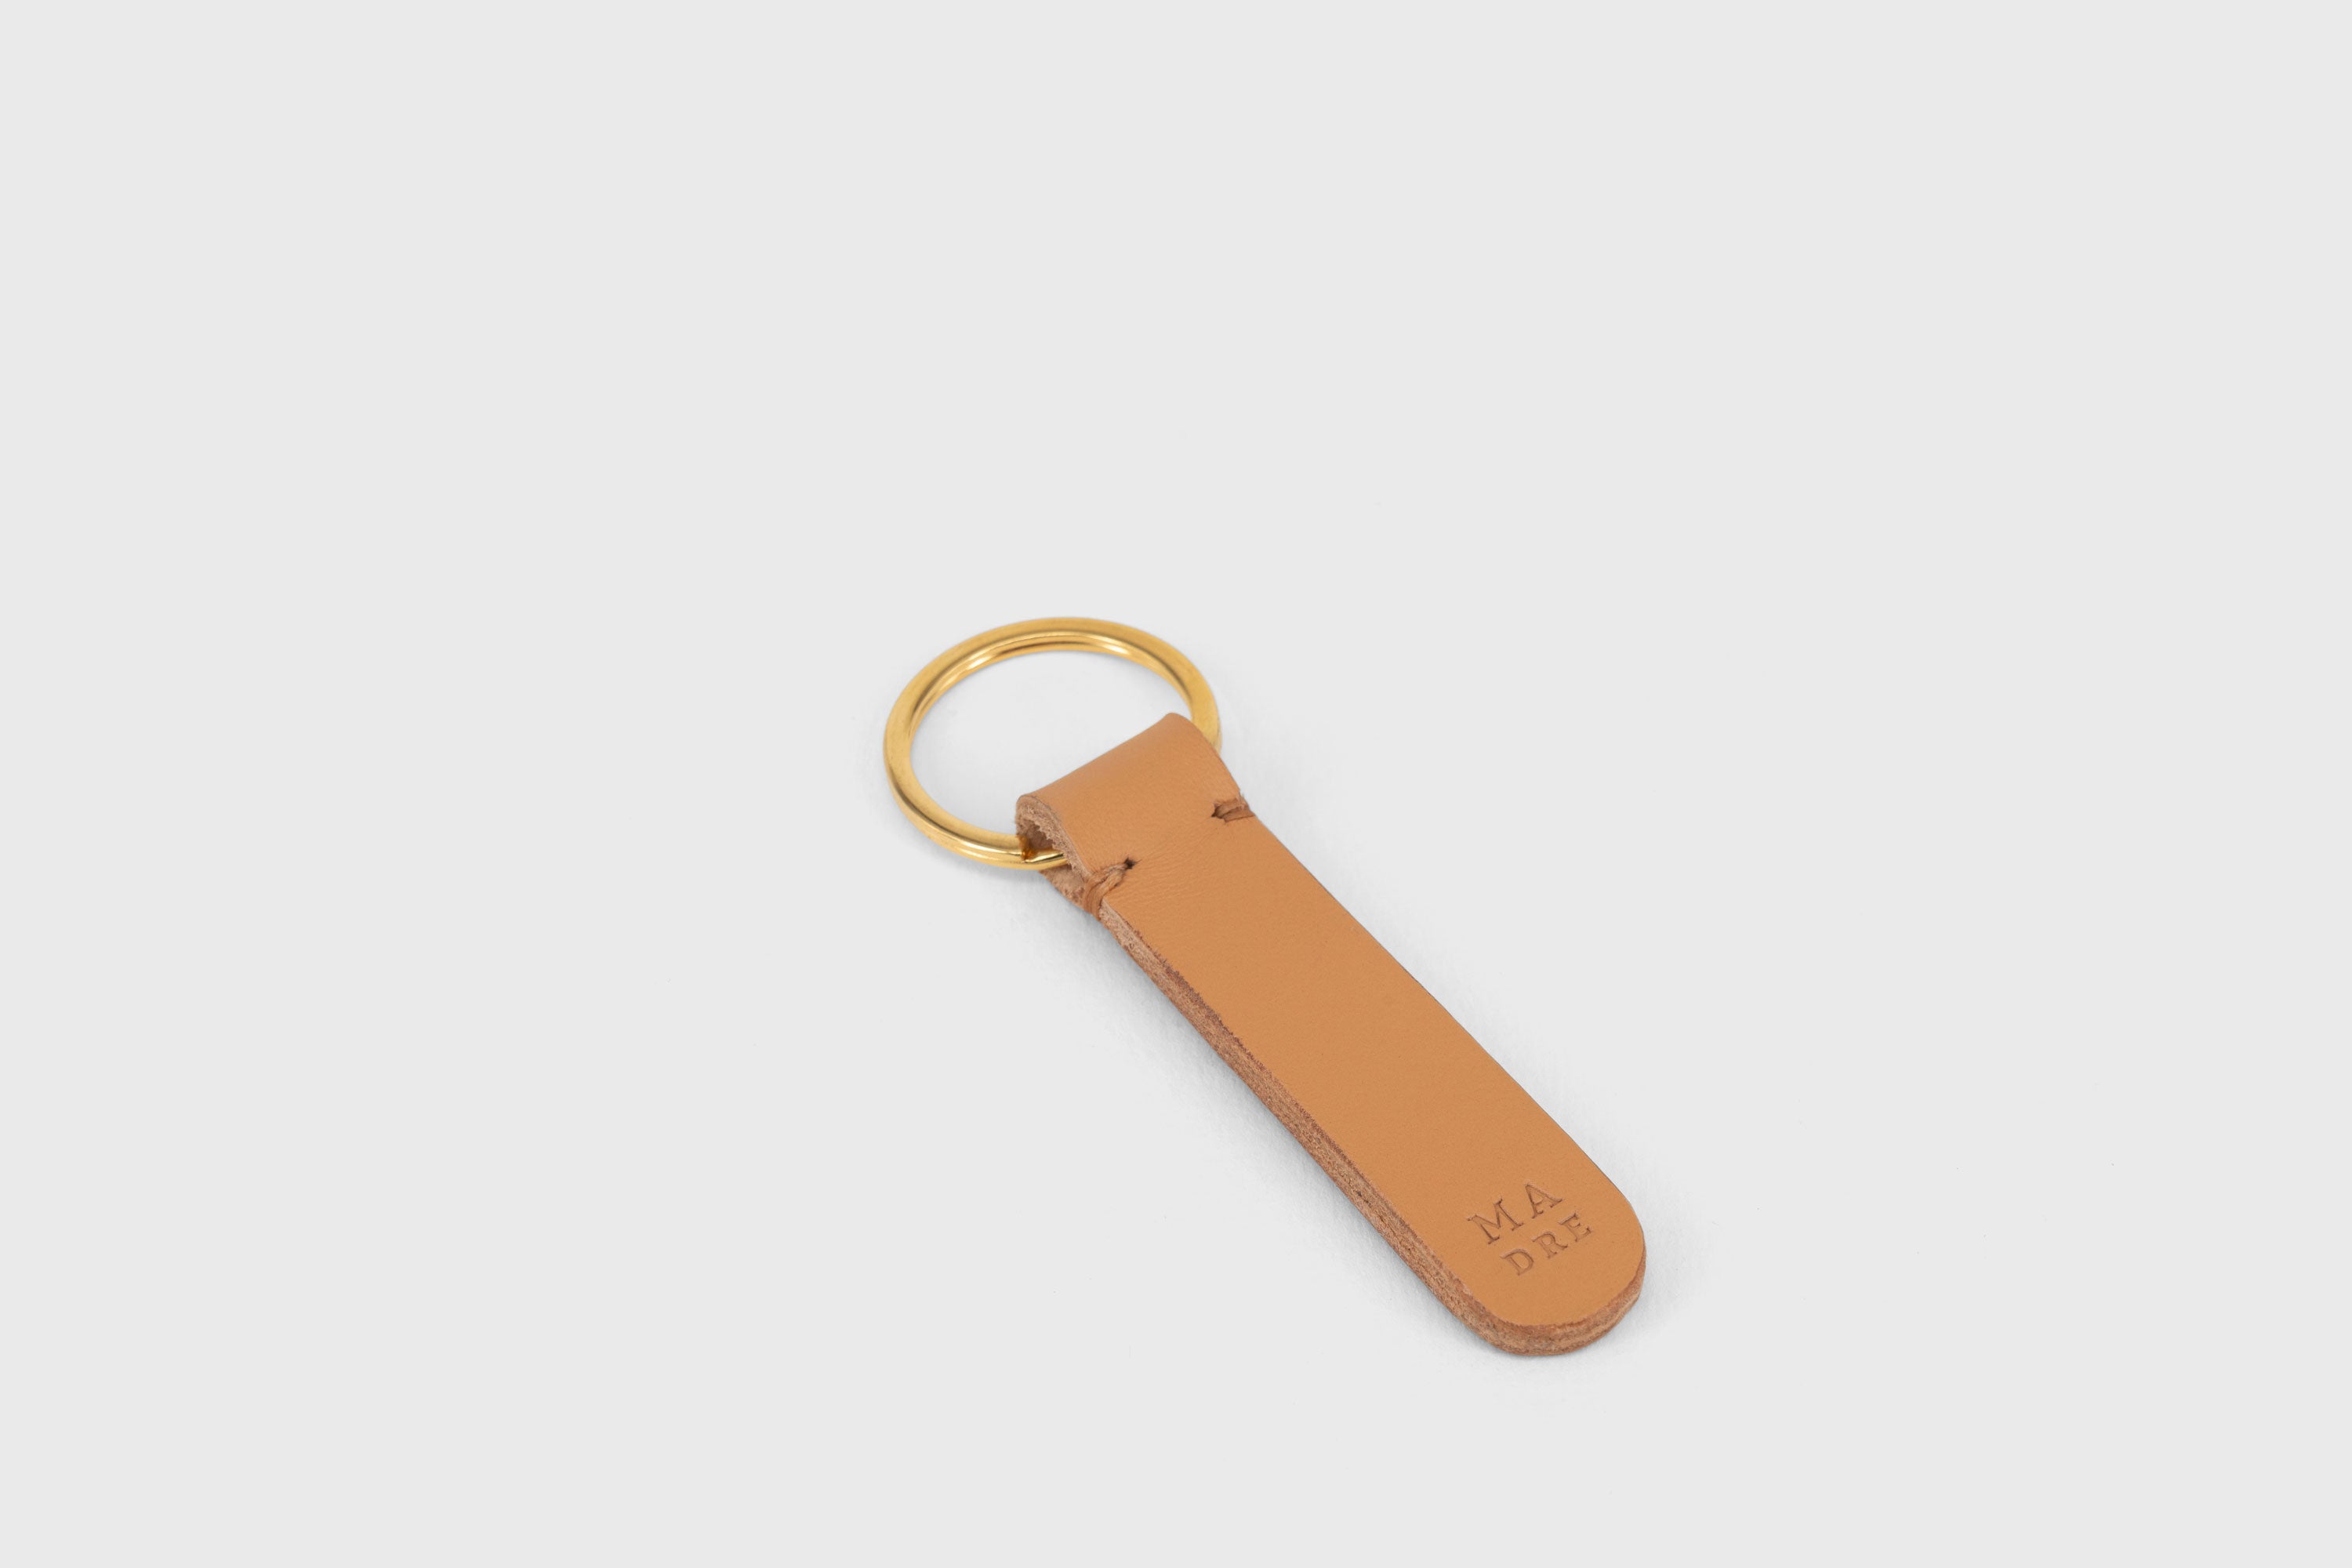 Key Ring Leather Brown Color Fob Minimalist Designer Vegetable Tanned Full Grain Handcrafted Personalised Premium Quality Gold Atelier Madre Manuel Dreesmann Barcelona Spain